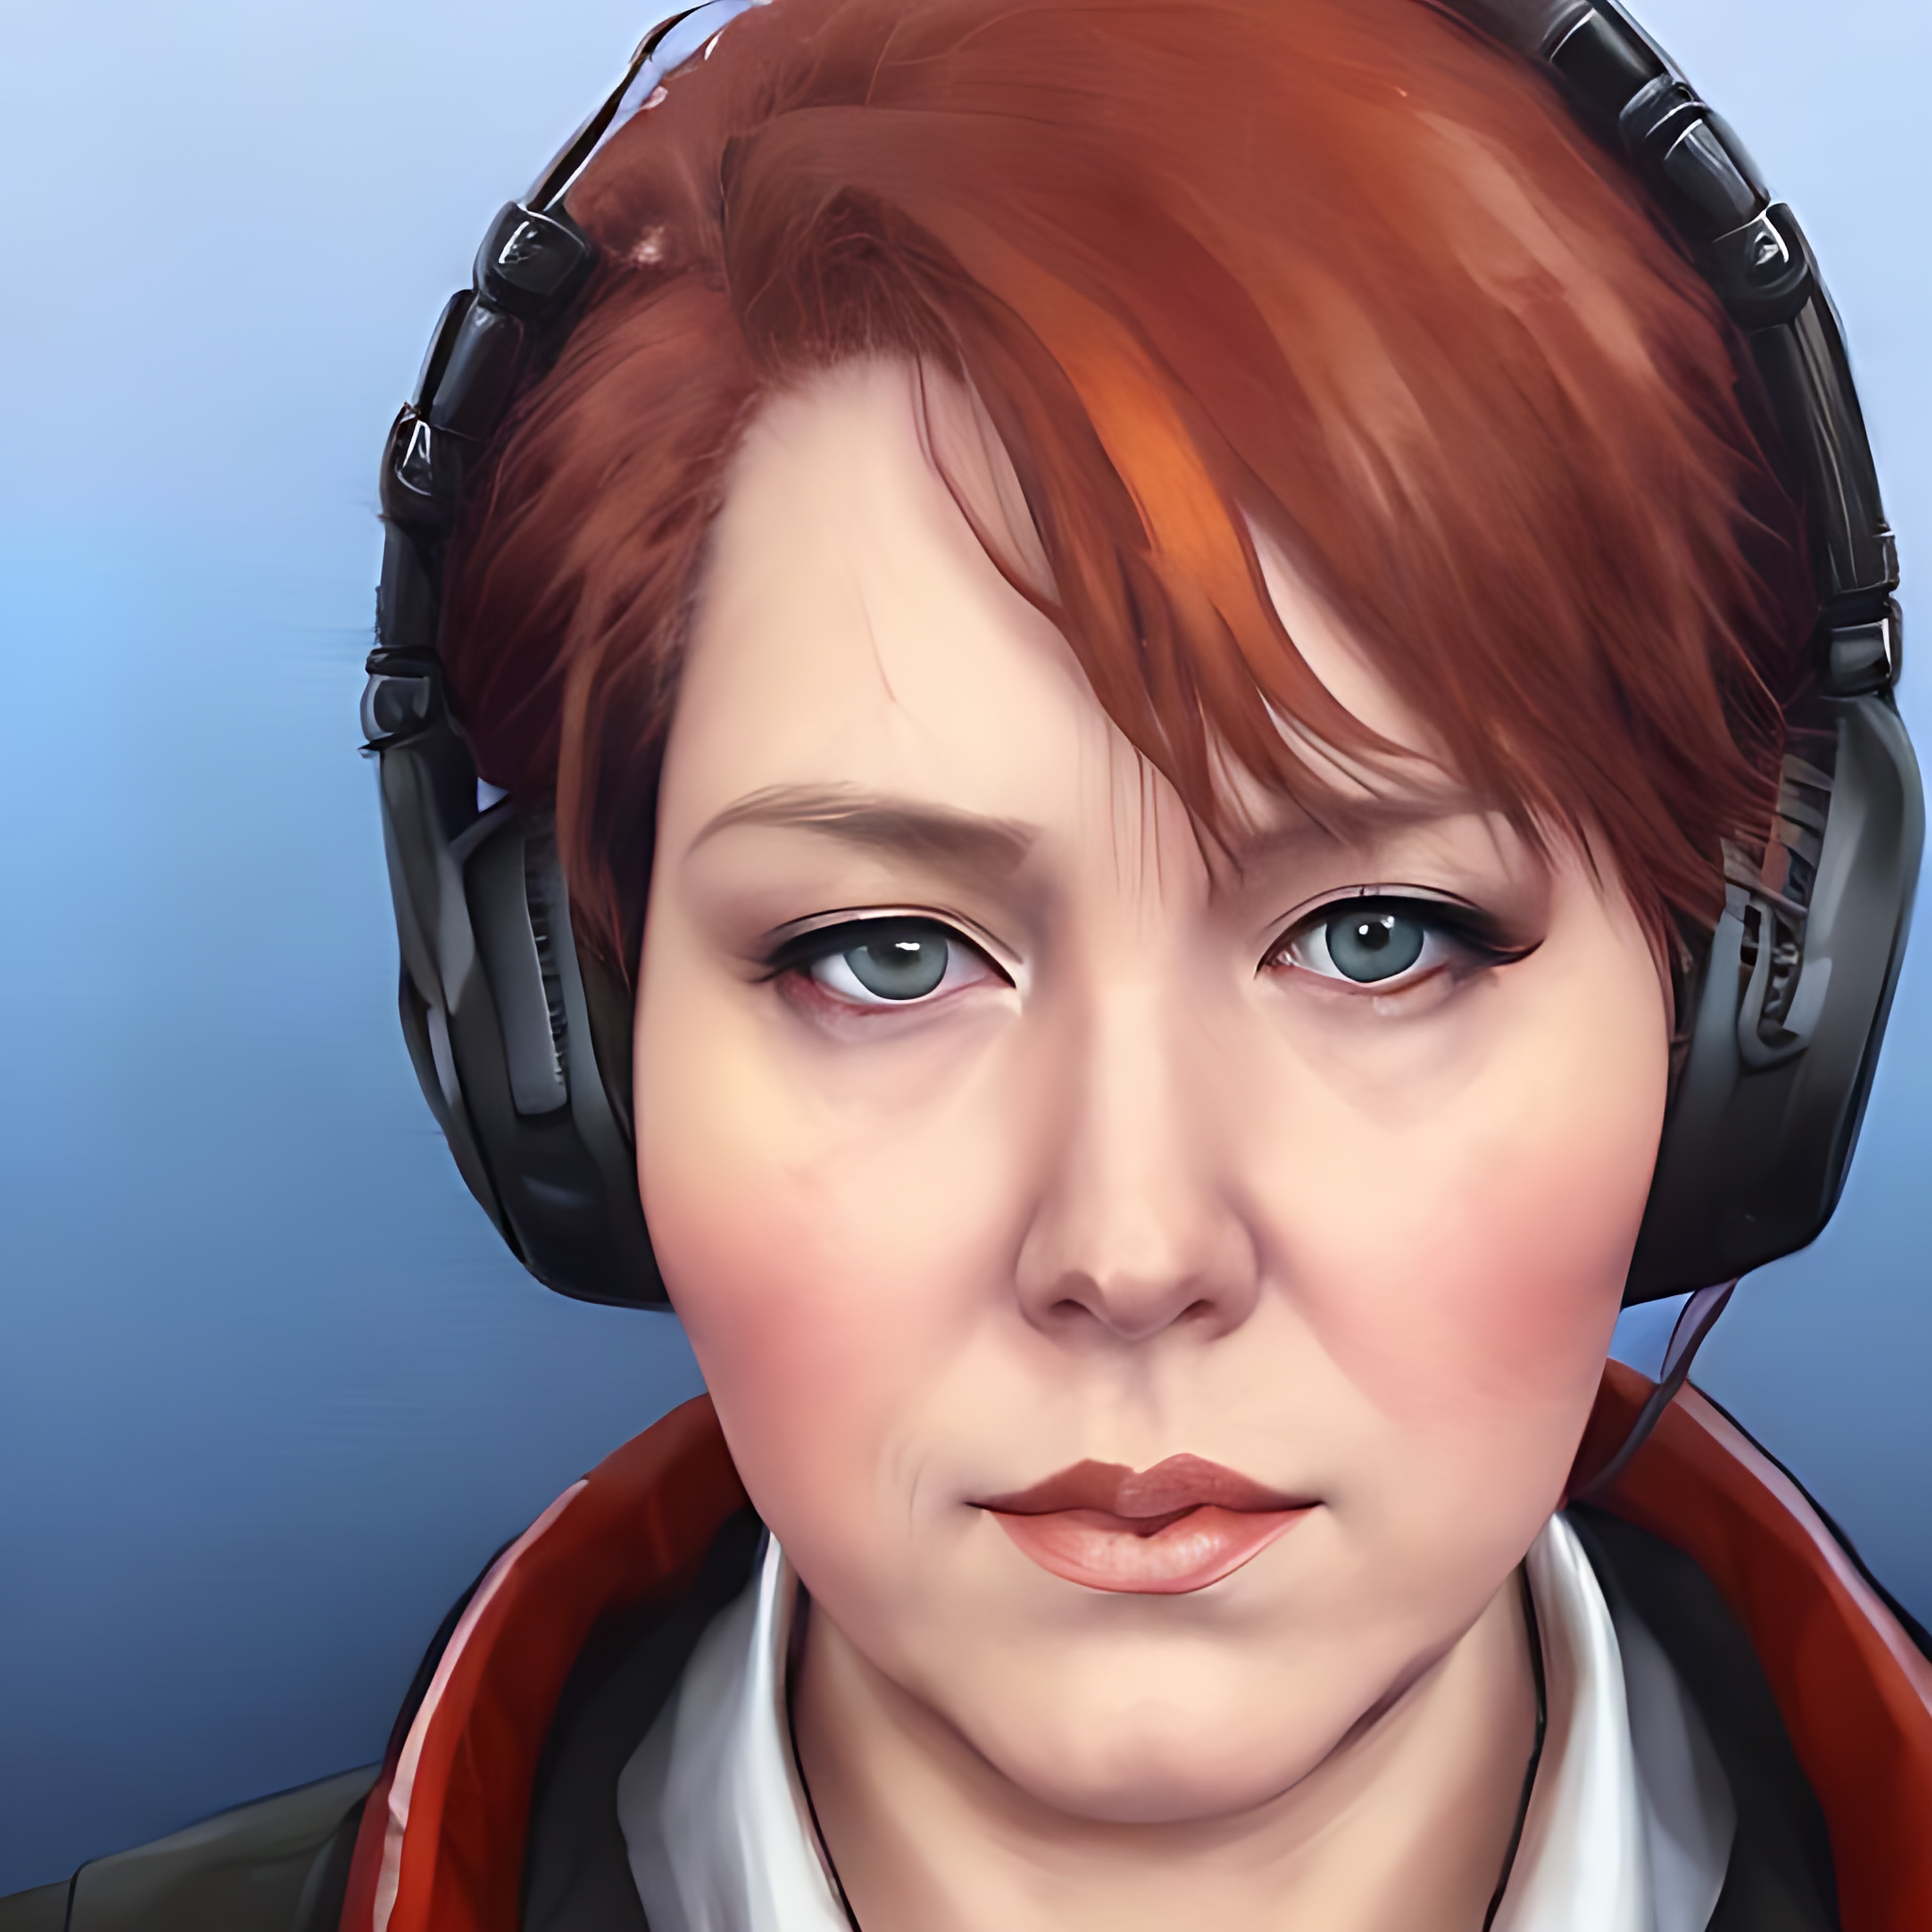 a woman with red hair and a solemn face is wearing headphones